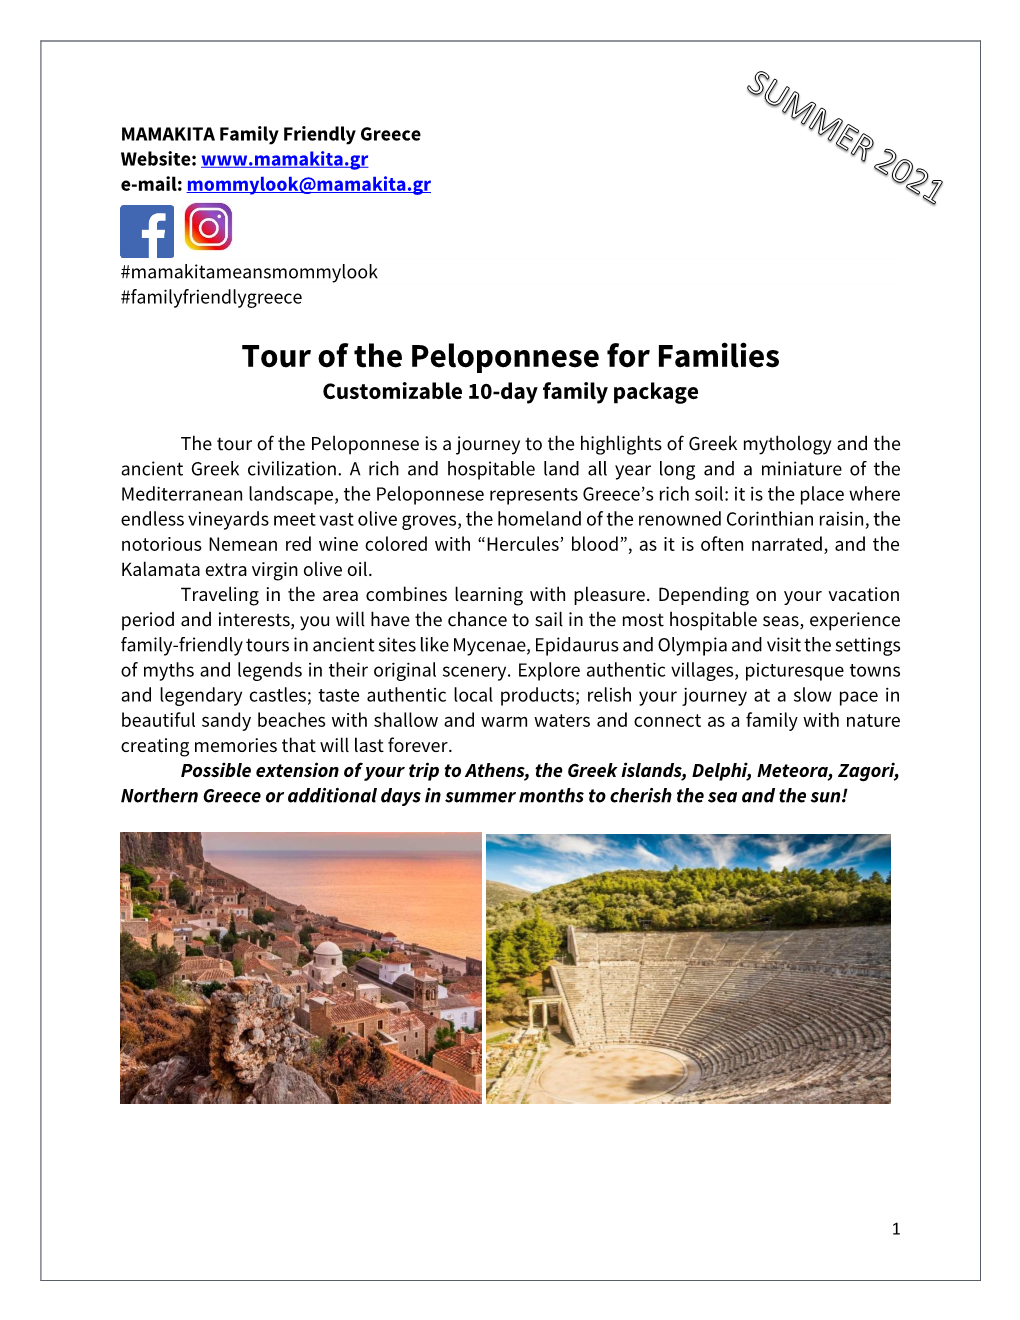 Tour of the Peloponnese for Families Customizable 10-Day Family Package